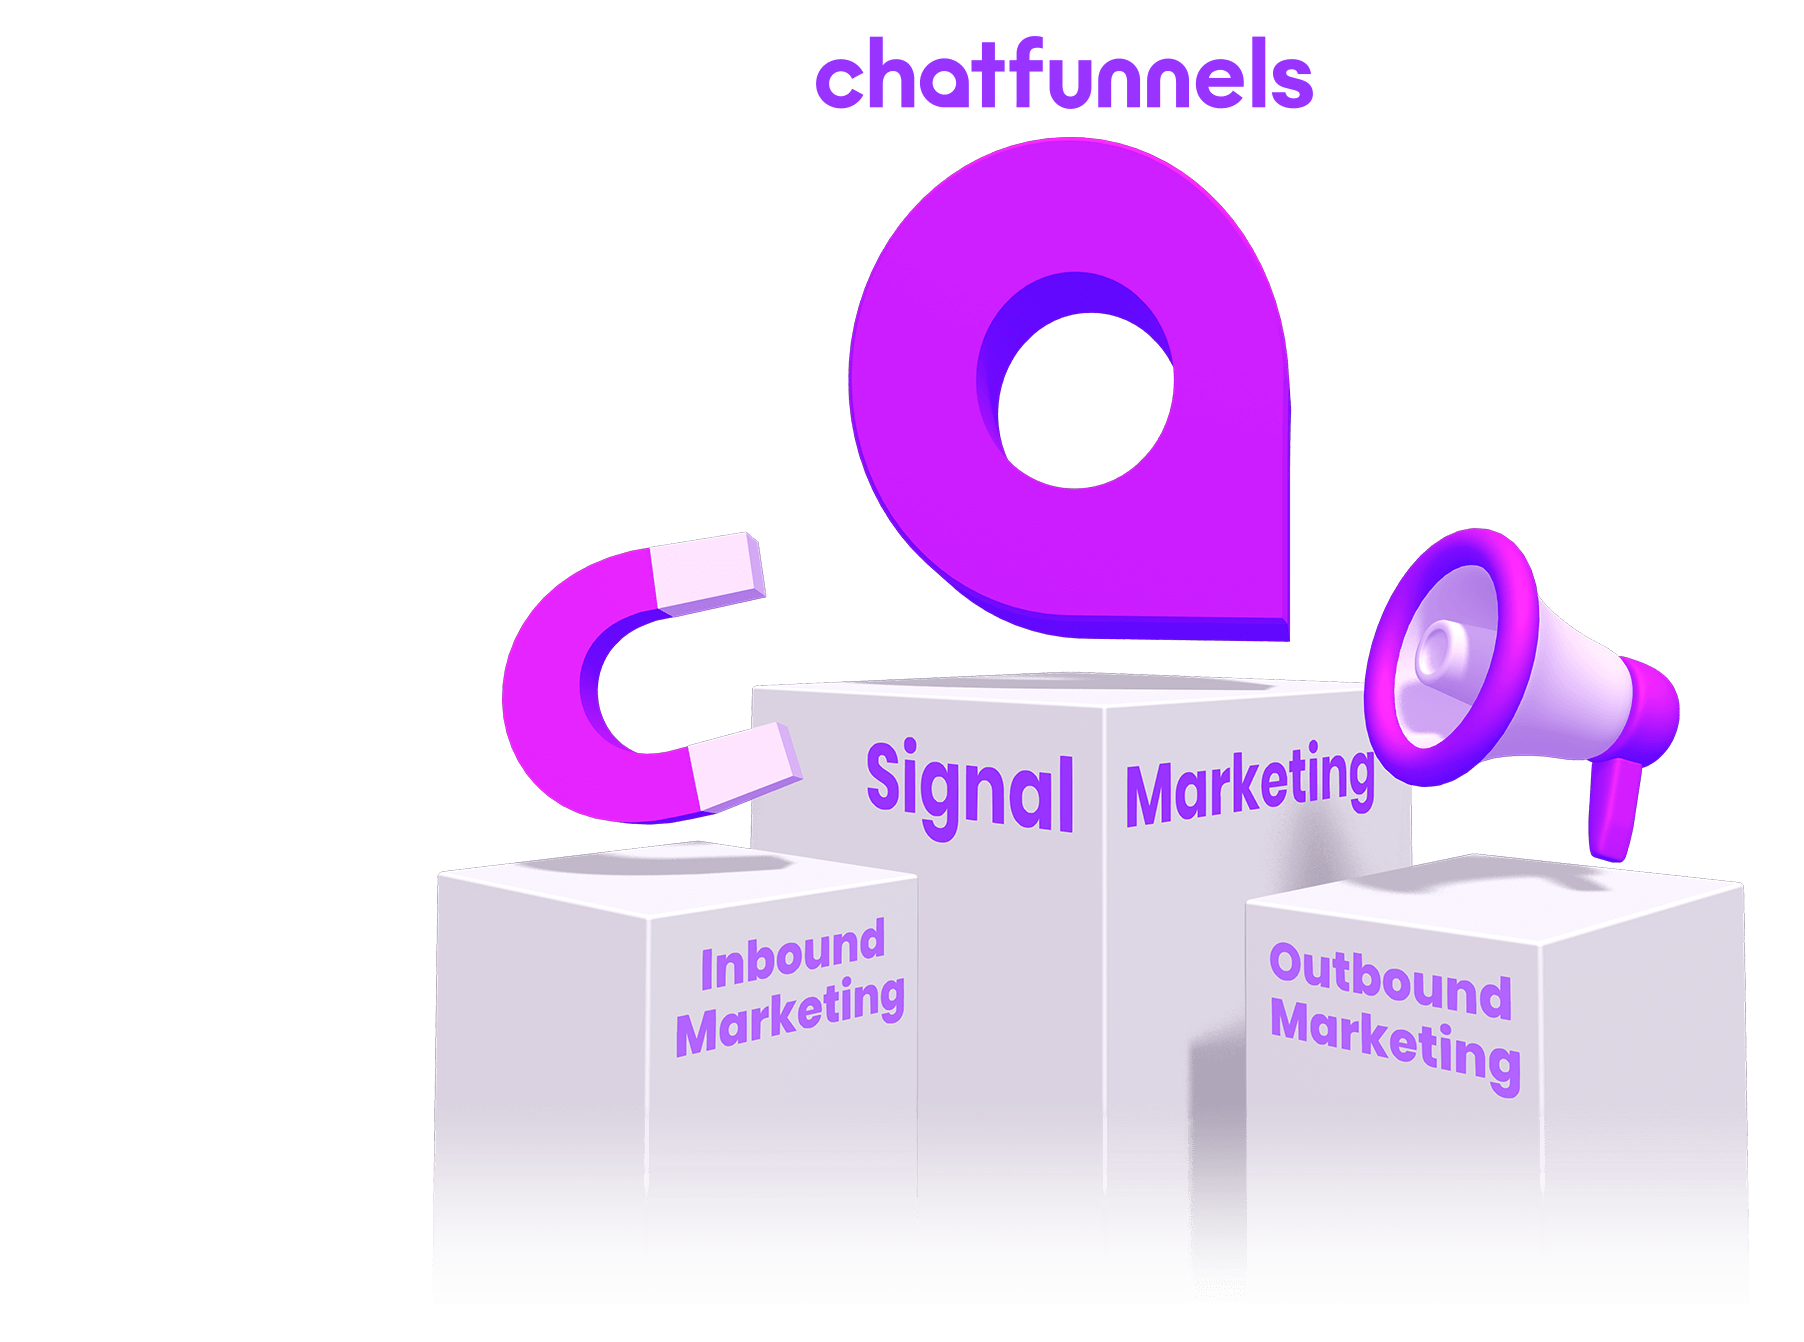 A Cross between signal and out bound marketing